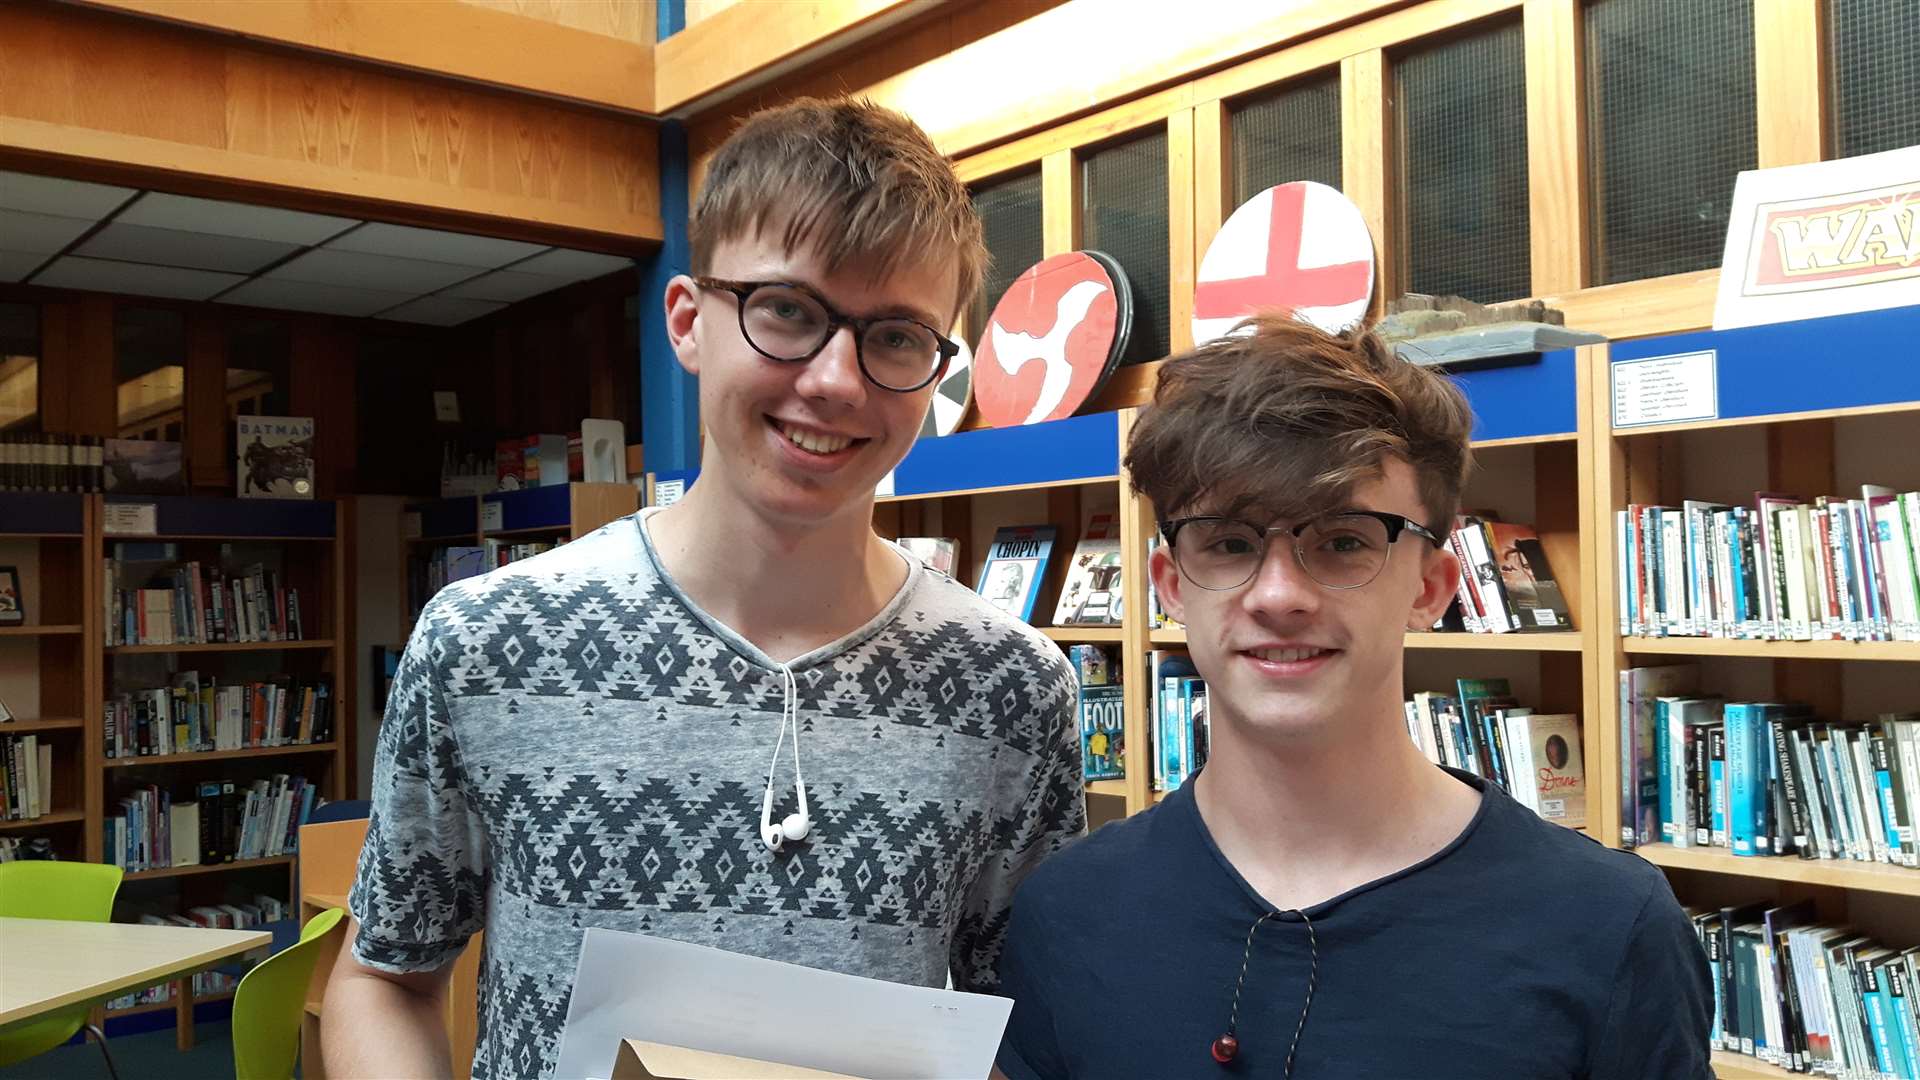 Will Triggs and Ben Sinclair achieved outstanding grades with their GCSE results